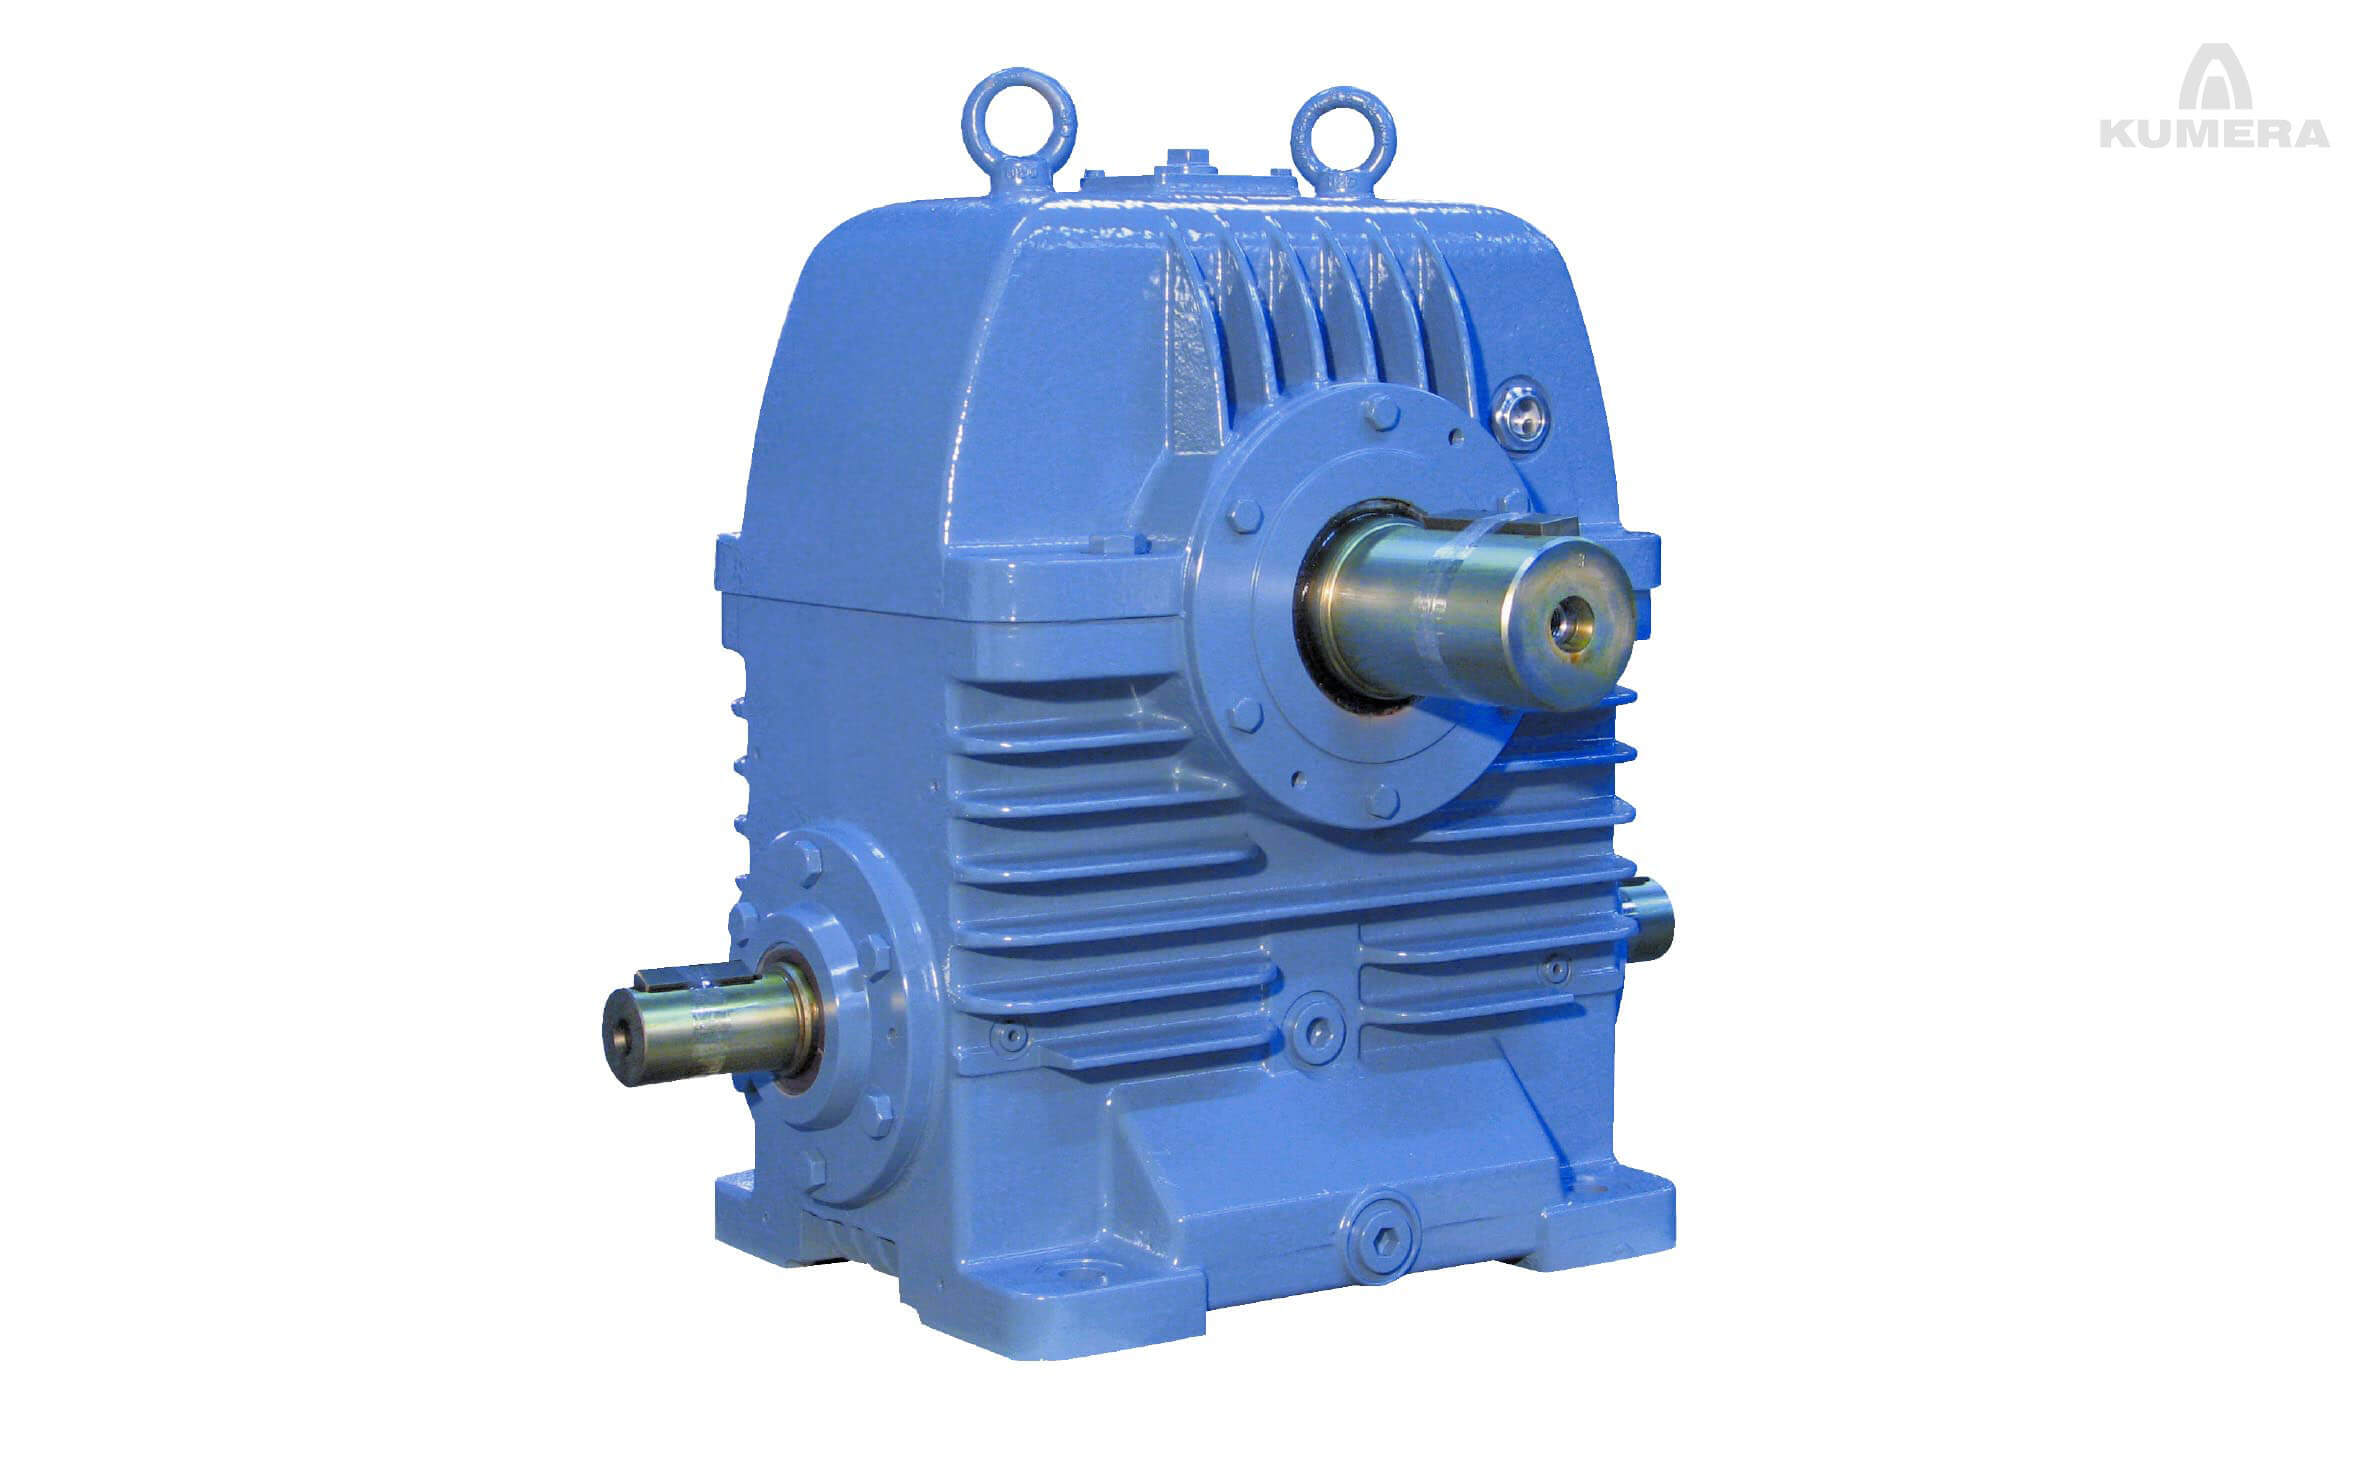 Kumera Worm Gearboxes. The Covera series is designed especially for non-continuous operation.